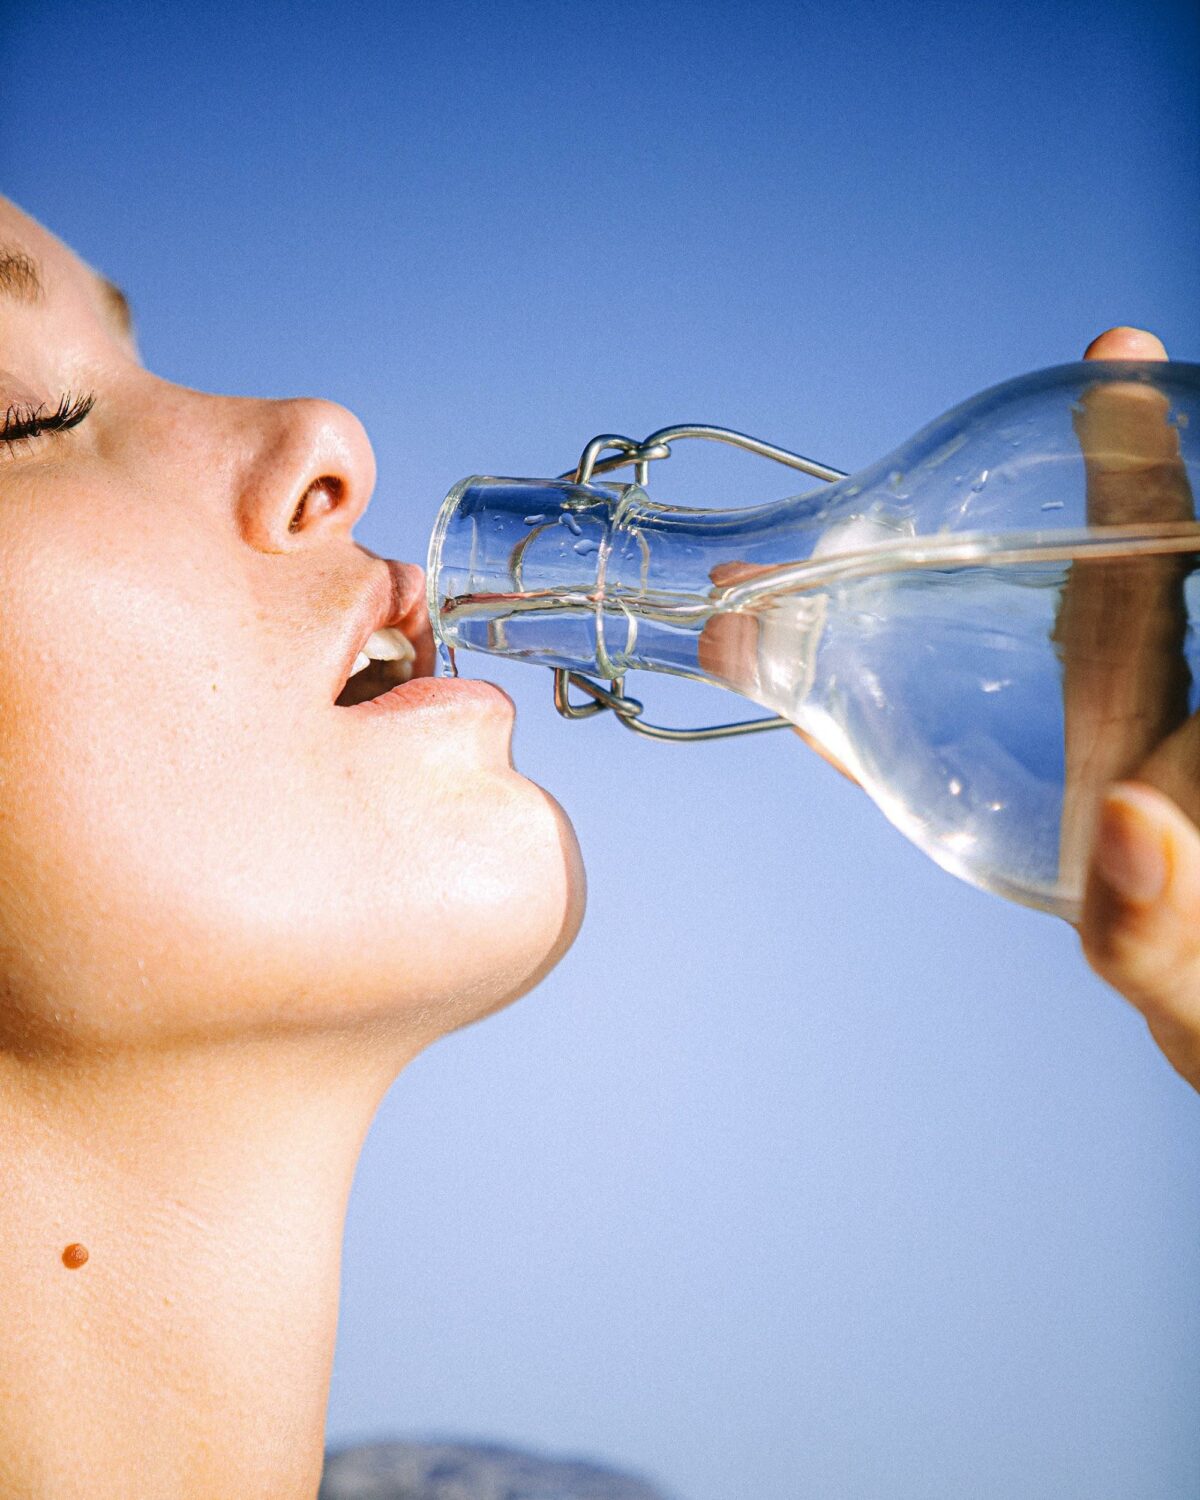 Can You Drink Water While Fasting?